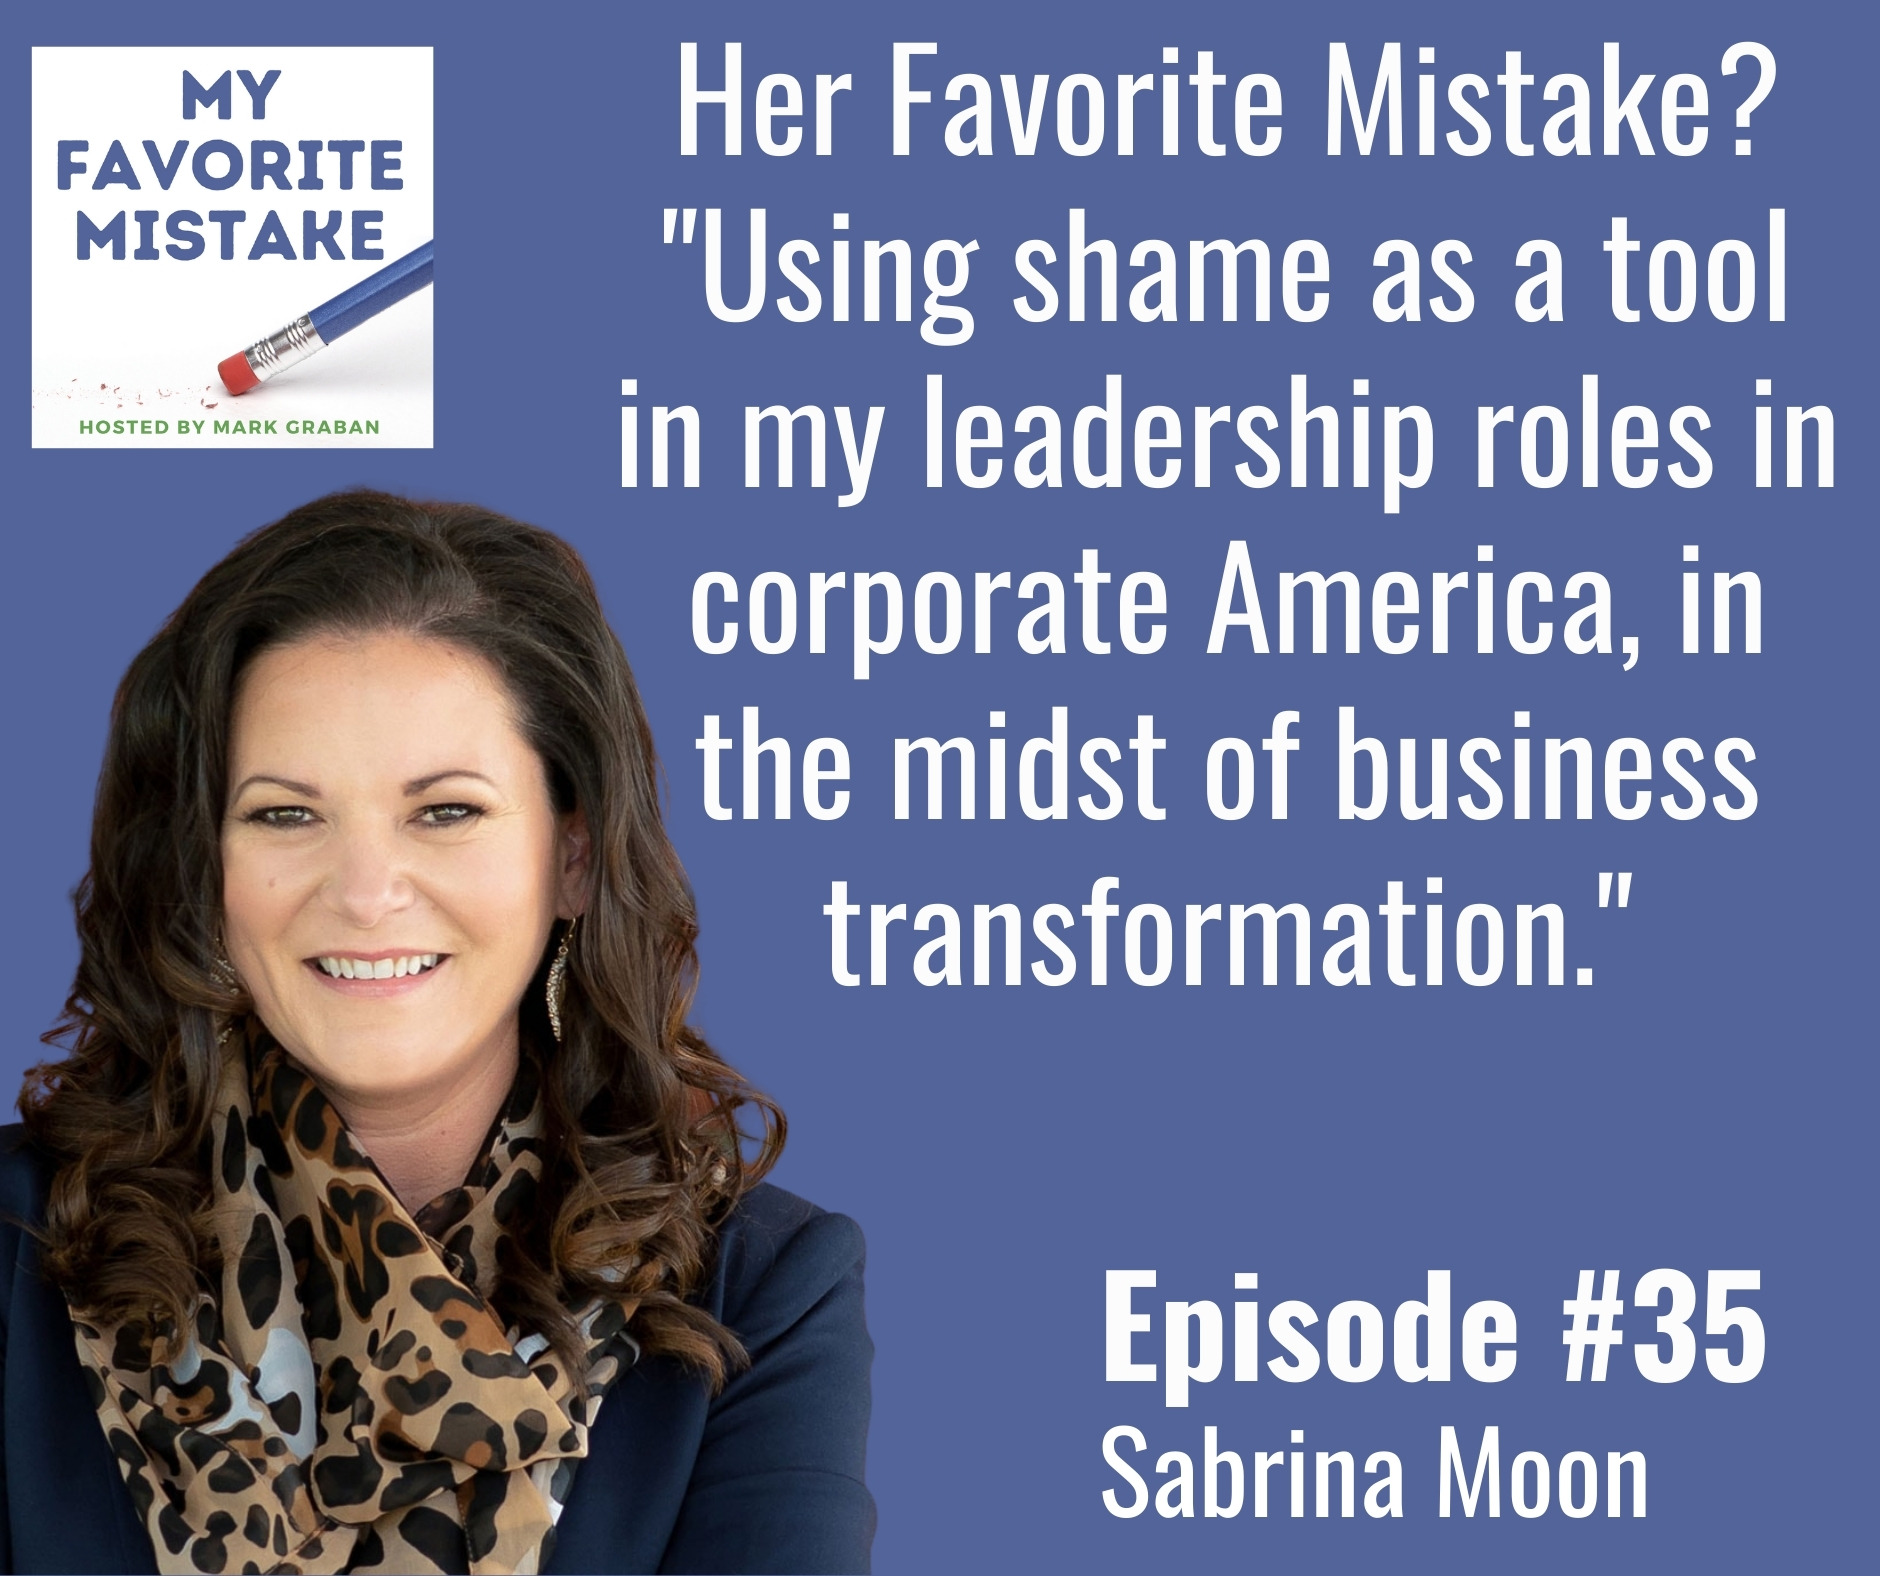 Her Favorite Mistake? "Using shame as a tool in my leadership roles in corporate America, in the midst of business transformation."